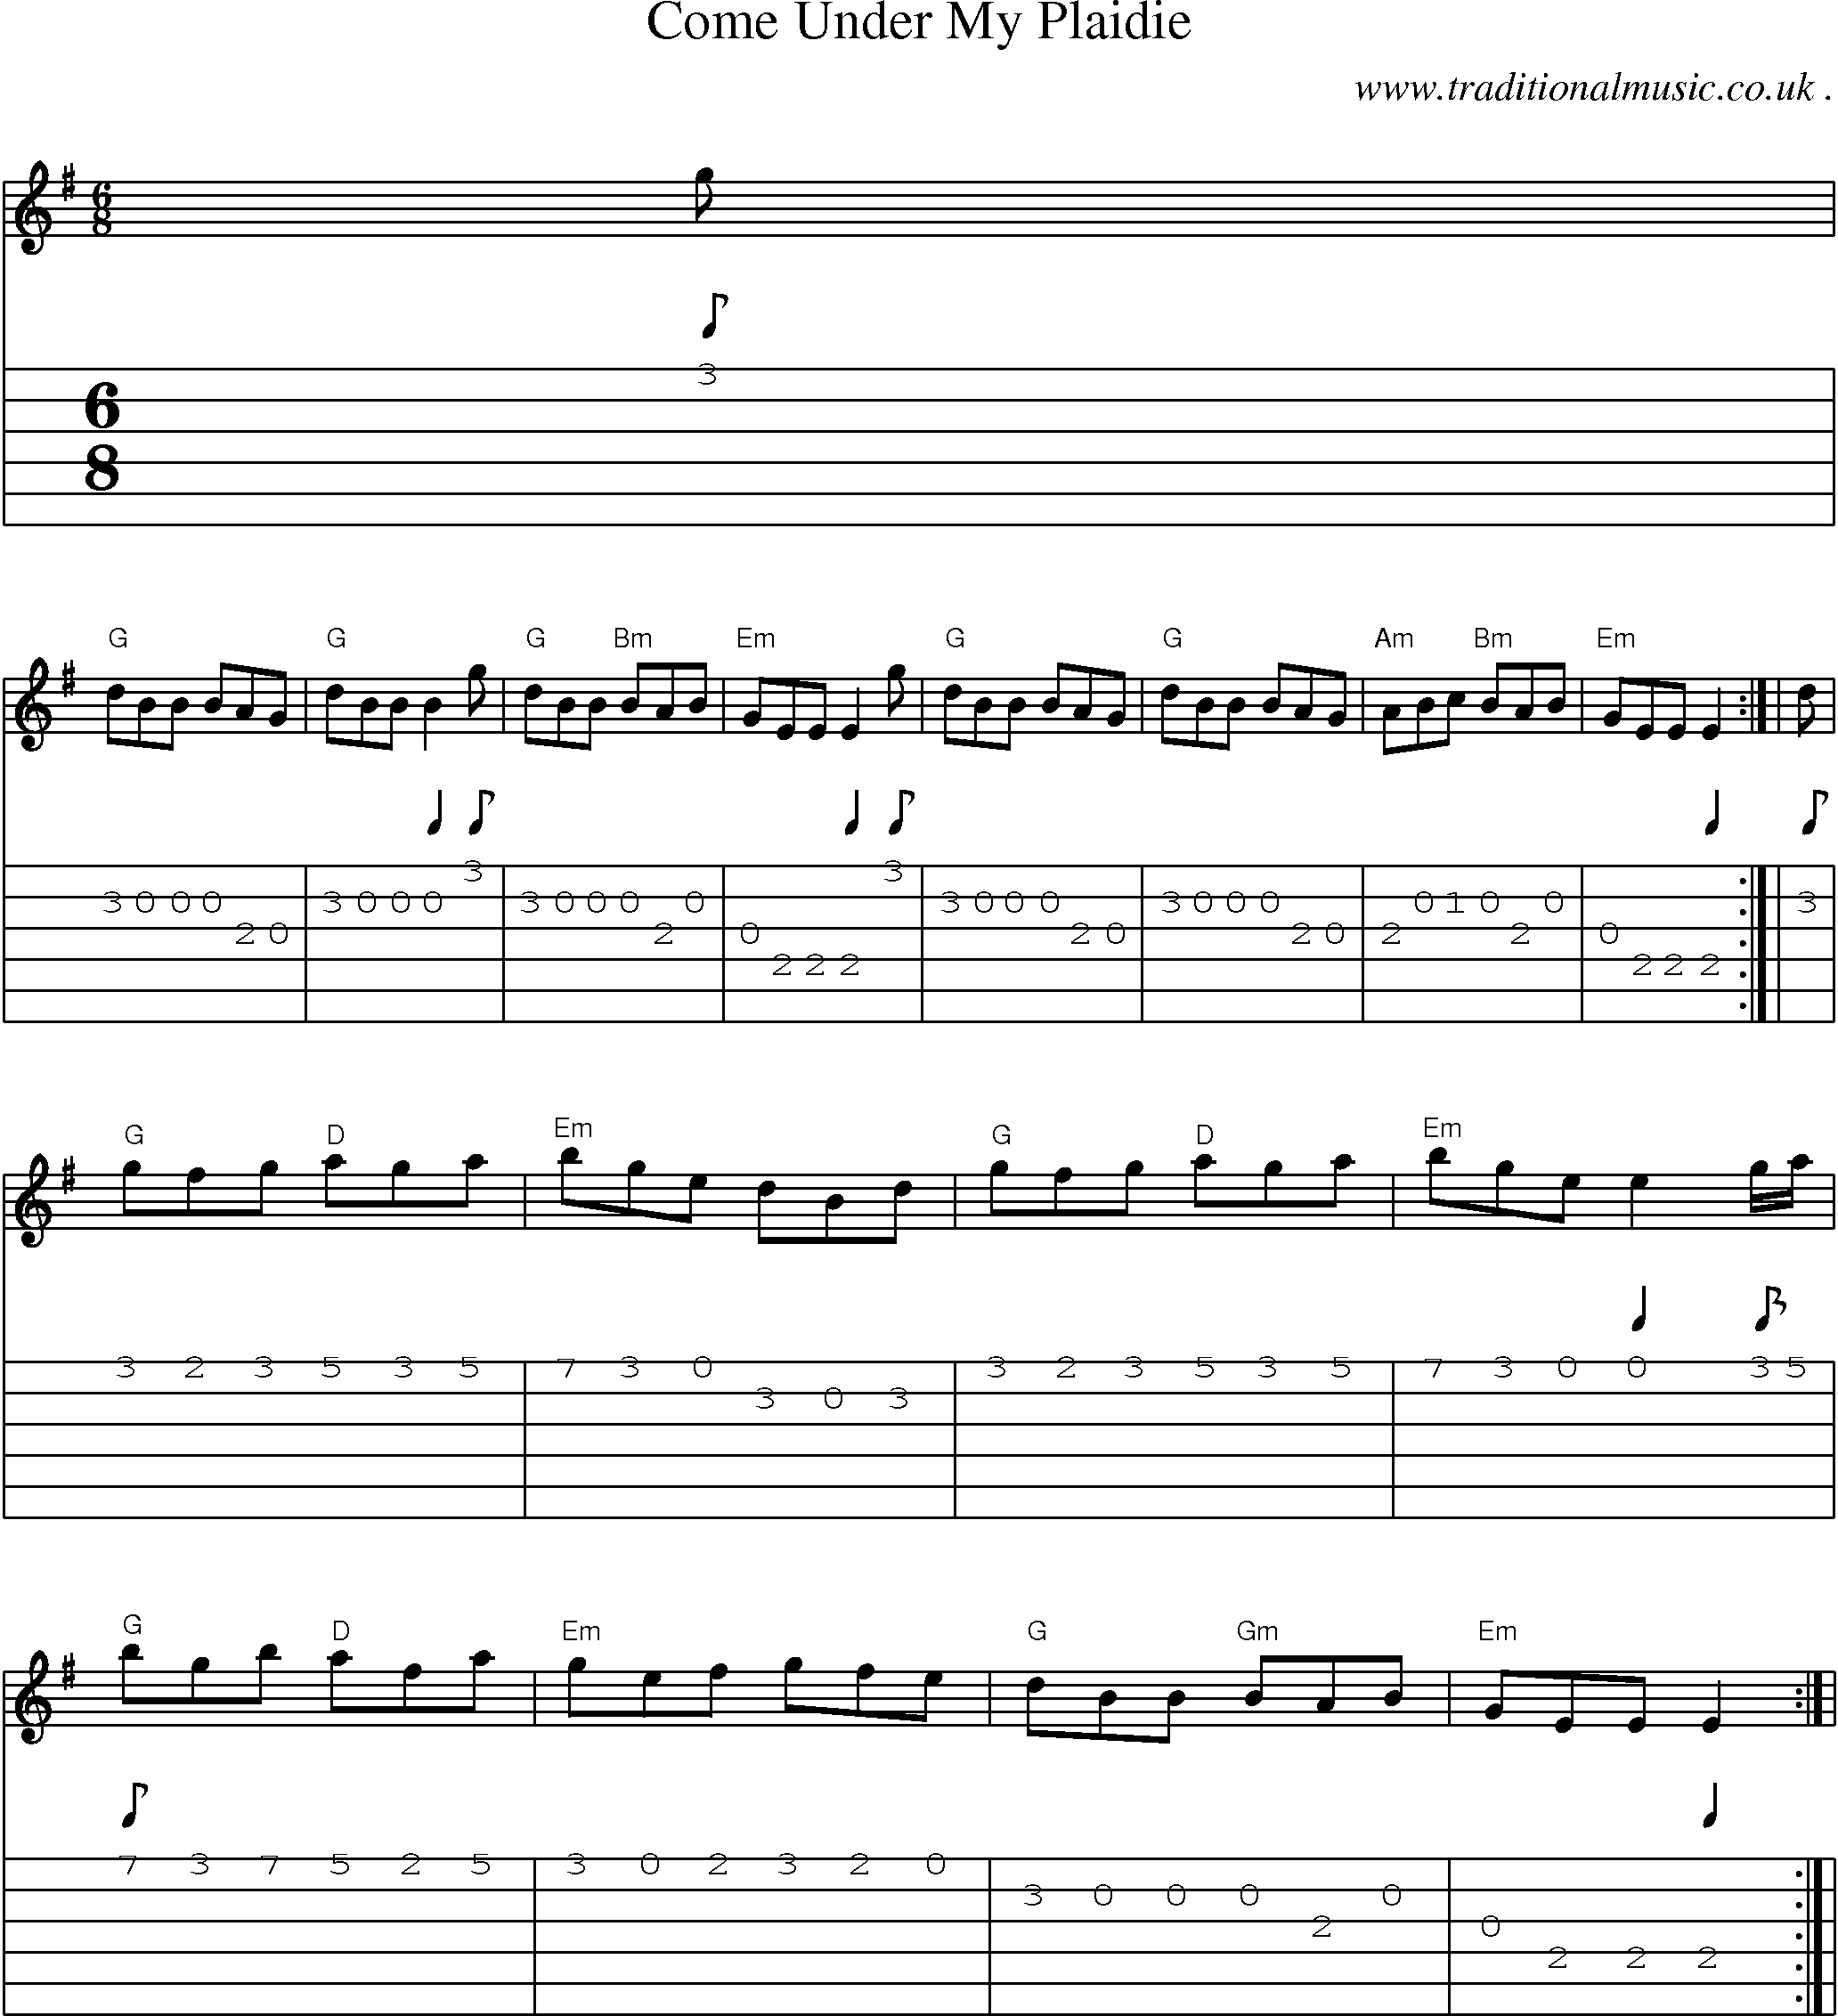 Sheet-music  score, Chords and Guitar Tabs for Come Under My Plaidie